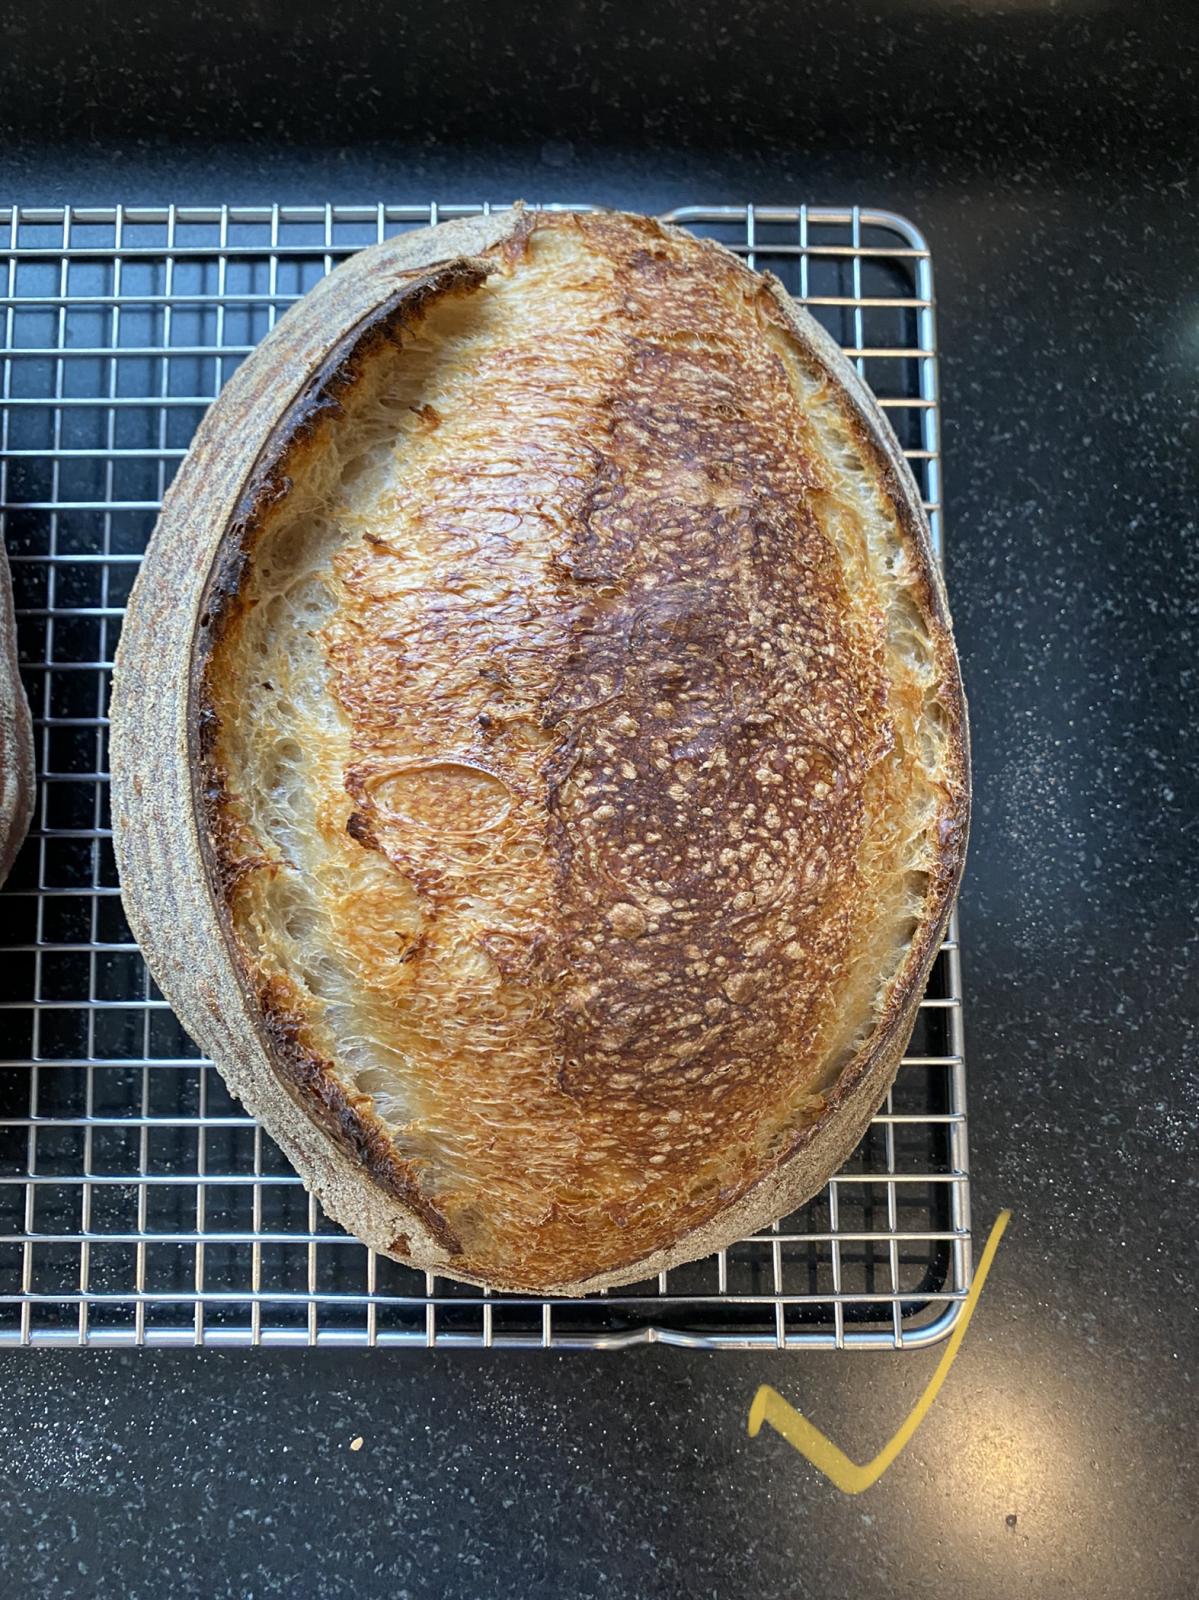 I wanted to show how I slice my sourdough loaves on my refurbished